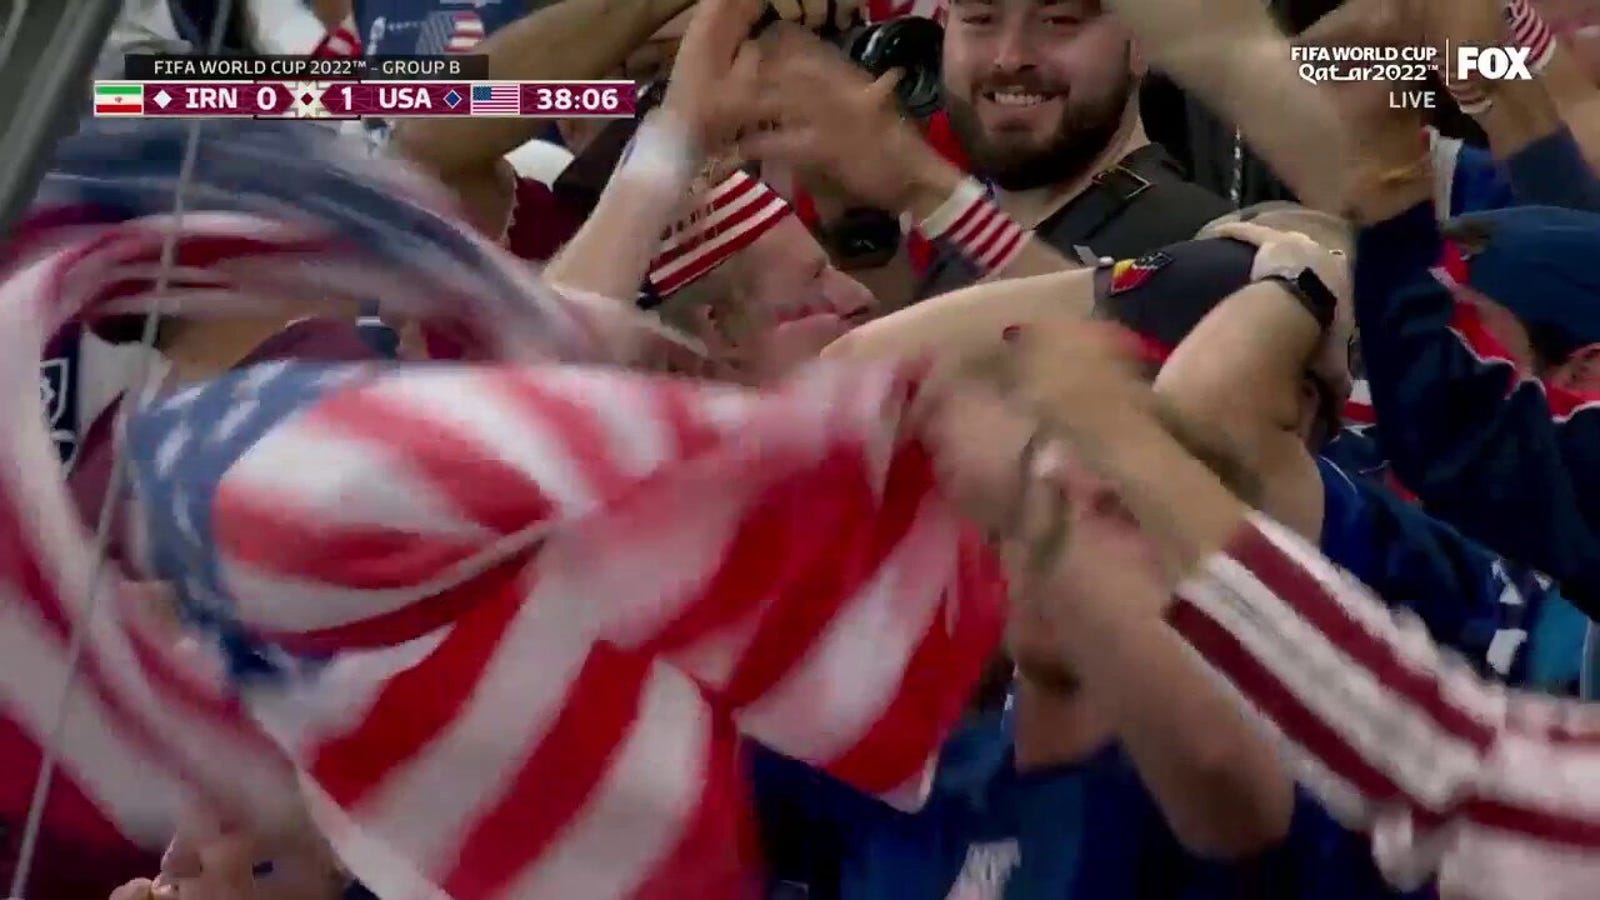 USA's Christian Pulisic scores against Iran in the 38'